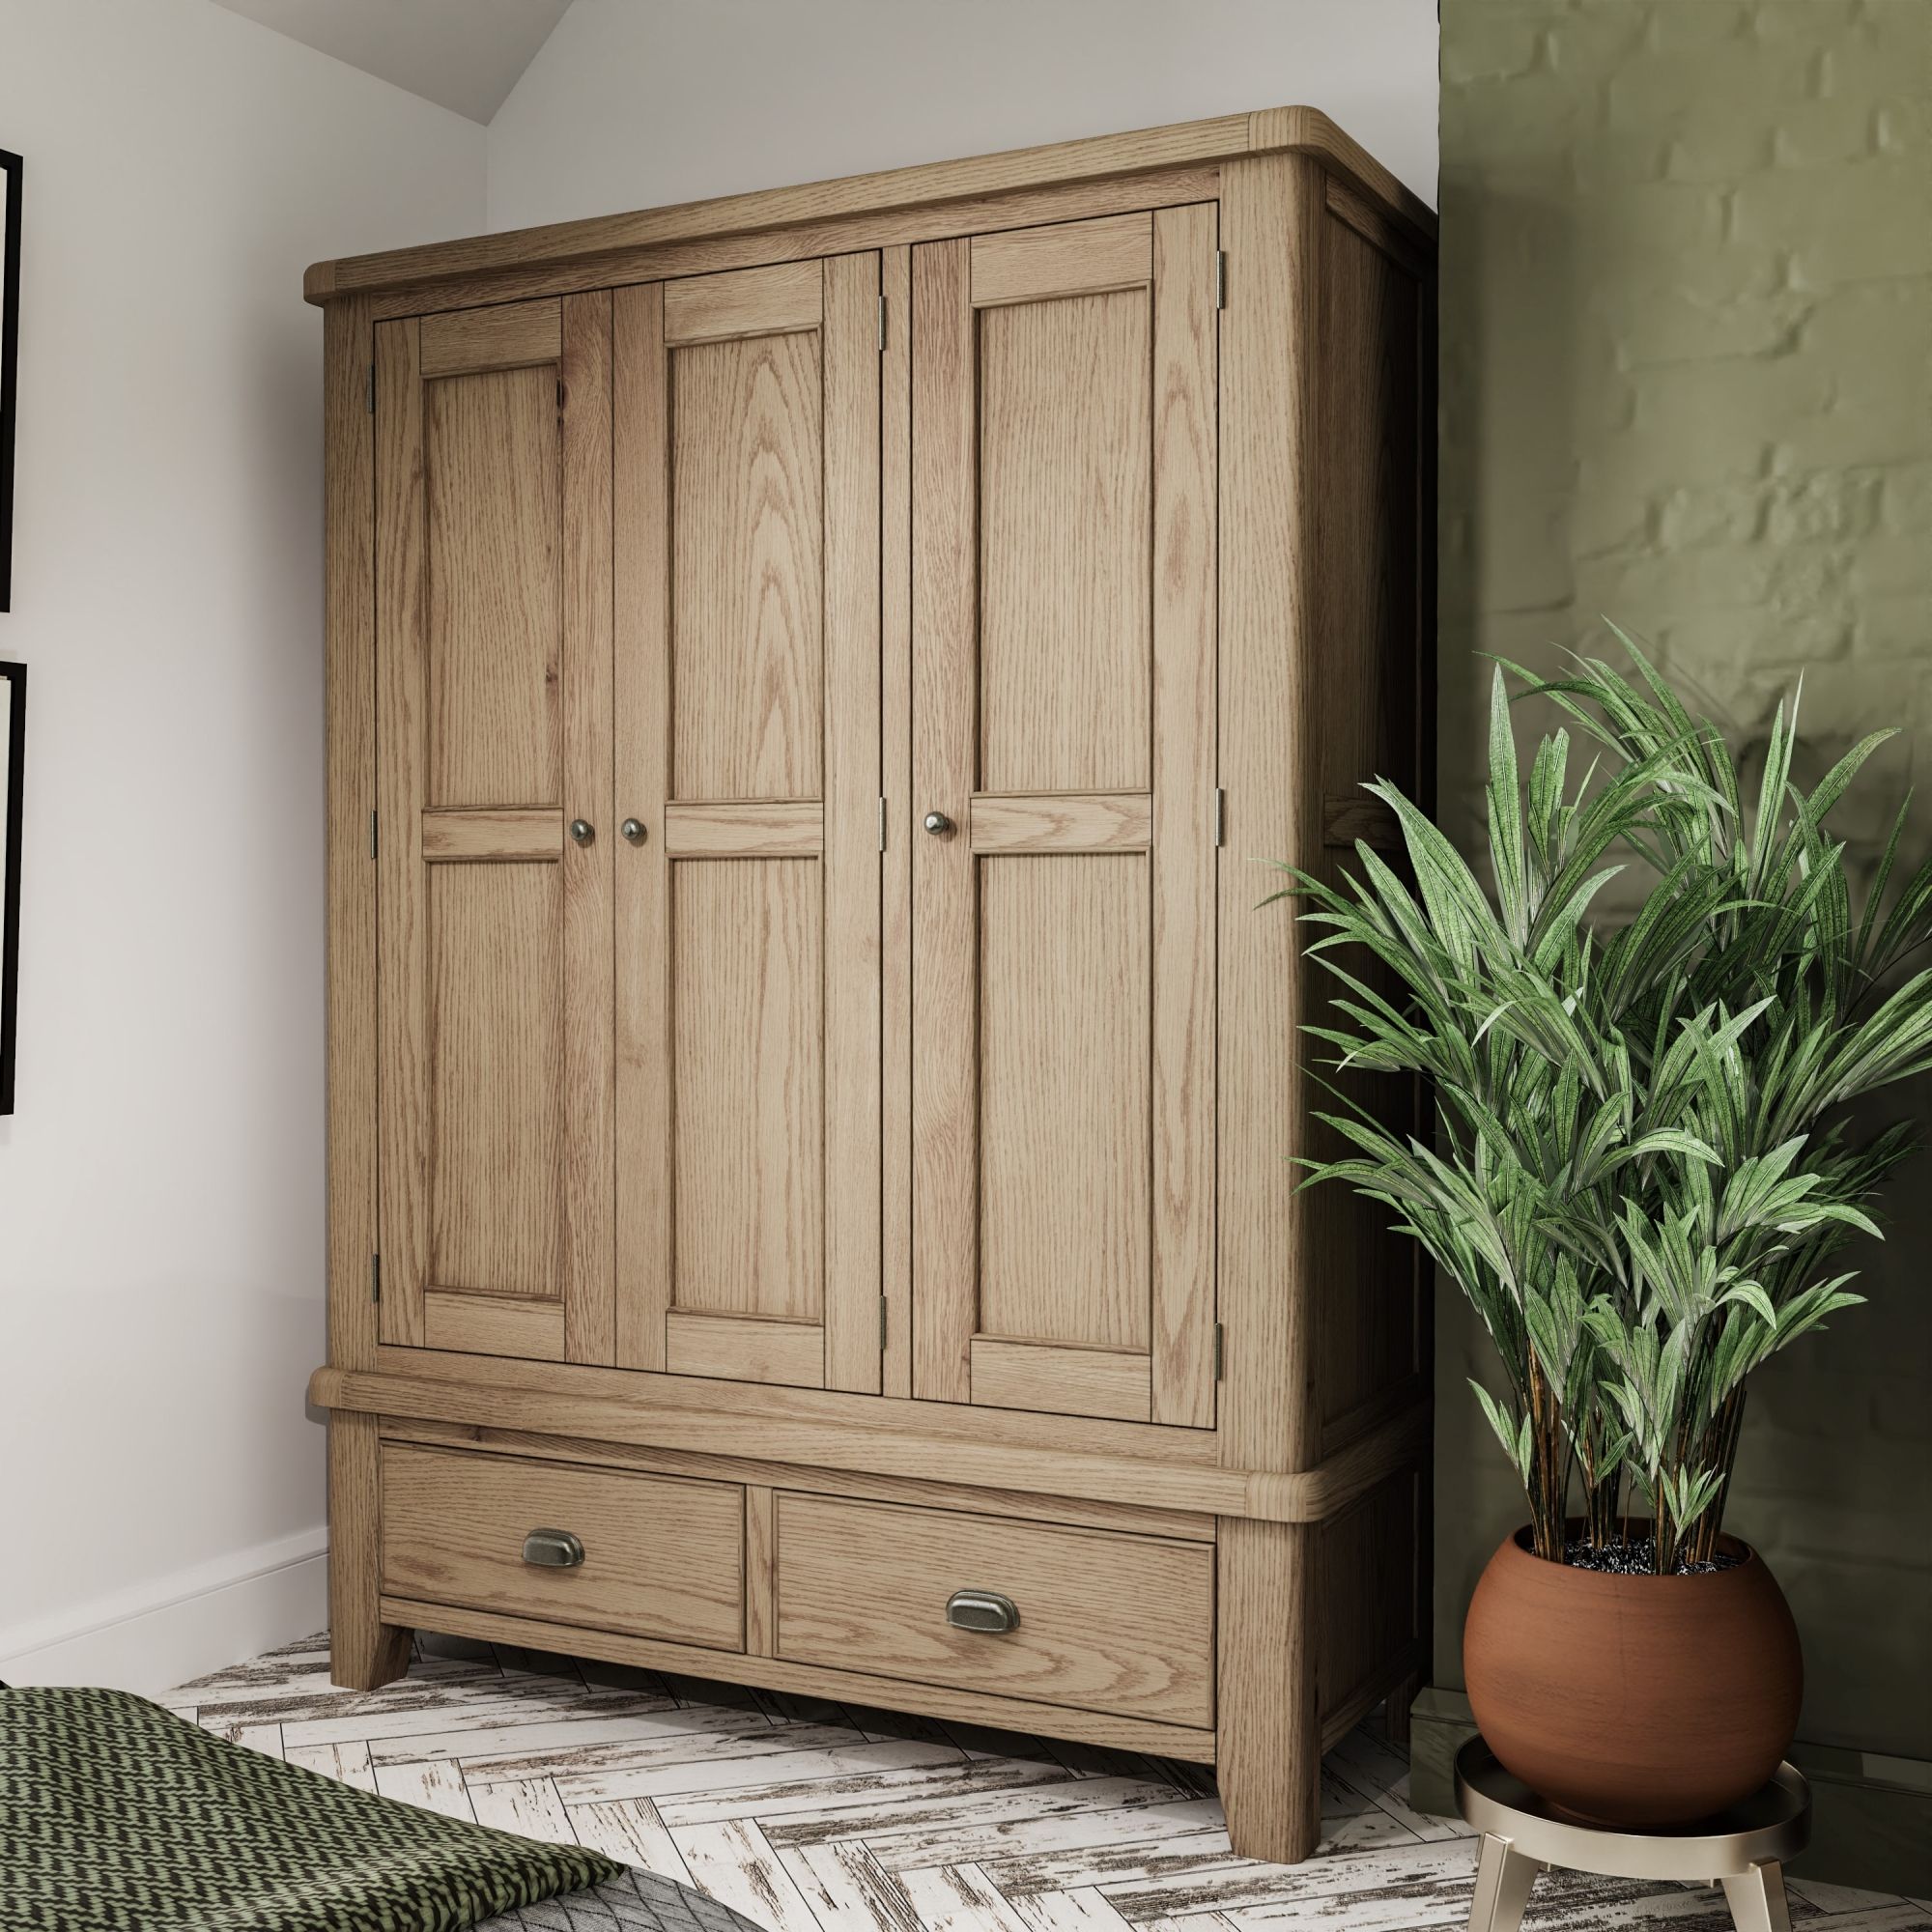 Smoked Oak 3 Door Wardrobe With 2 Drawers – Furniture World With Regard To Oak Wardrobes With Drawers And Shelves (View 10 of 15)